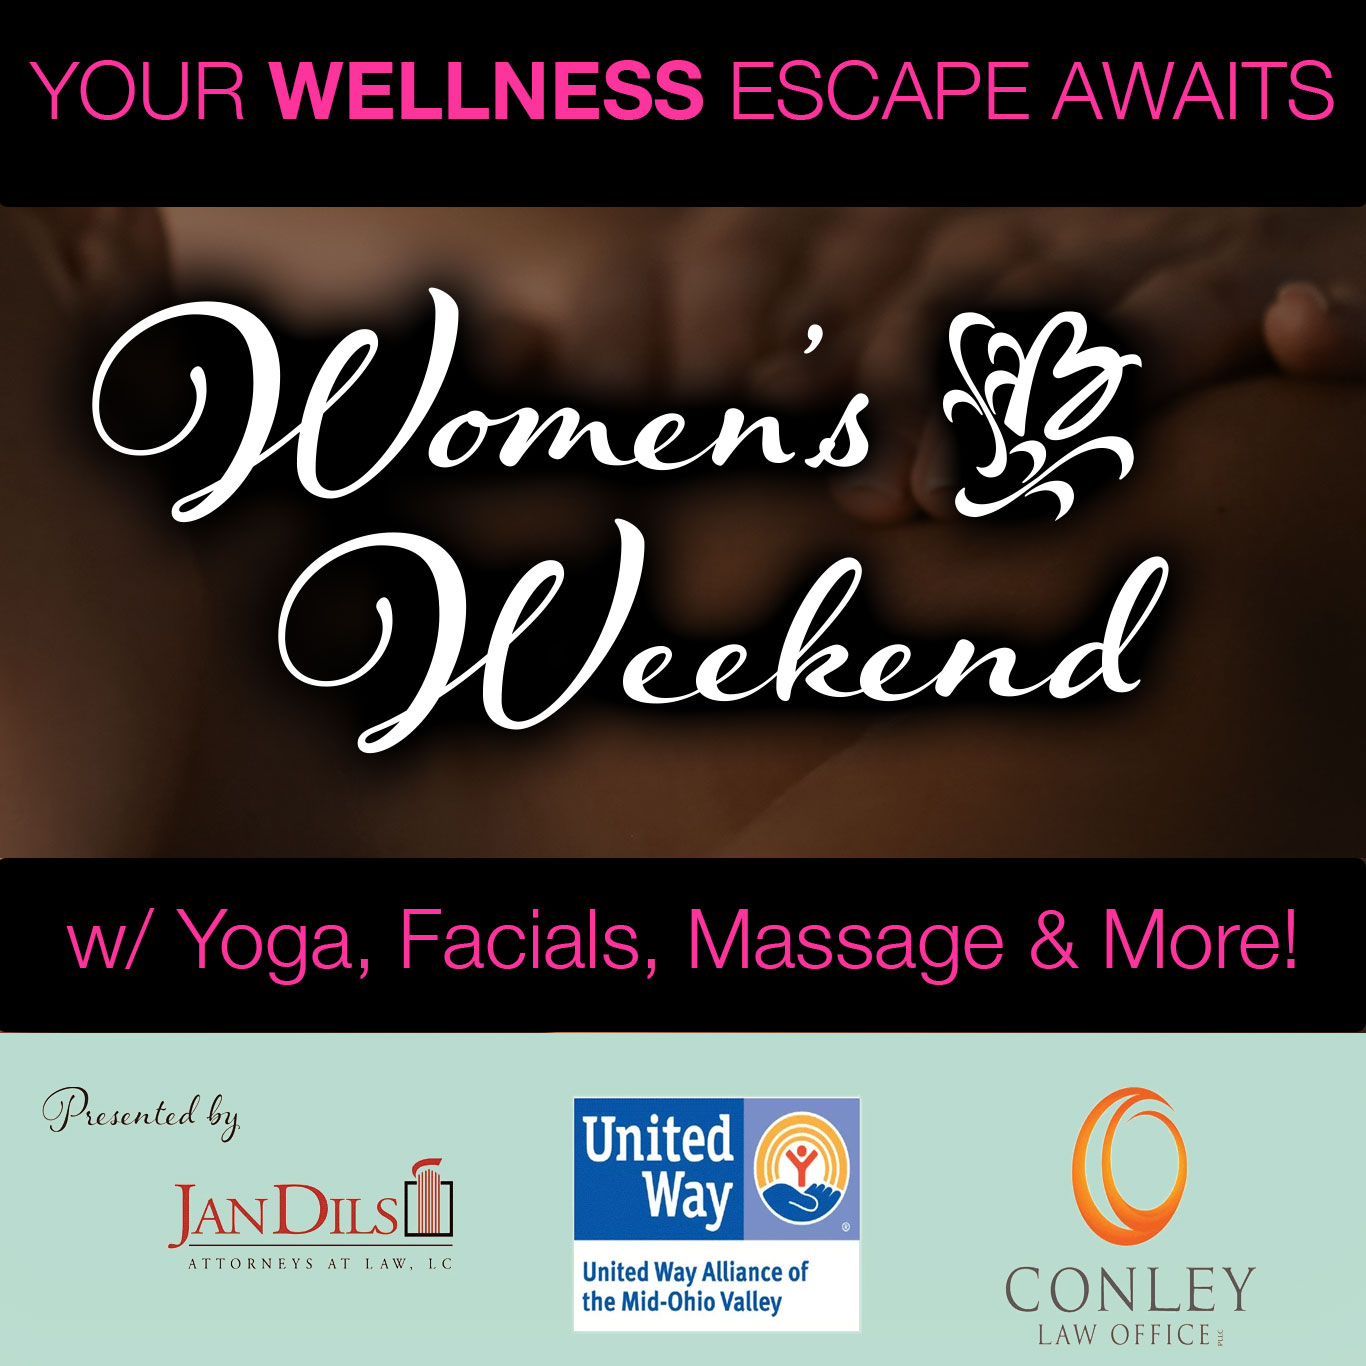 Your wellness escape awaits. Women's Weekend w/ yoga, facials, massage and more!